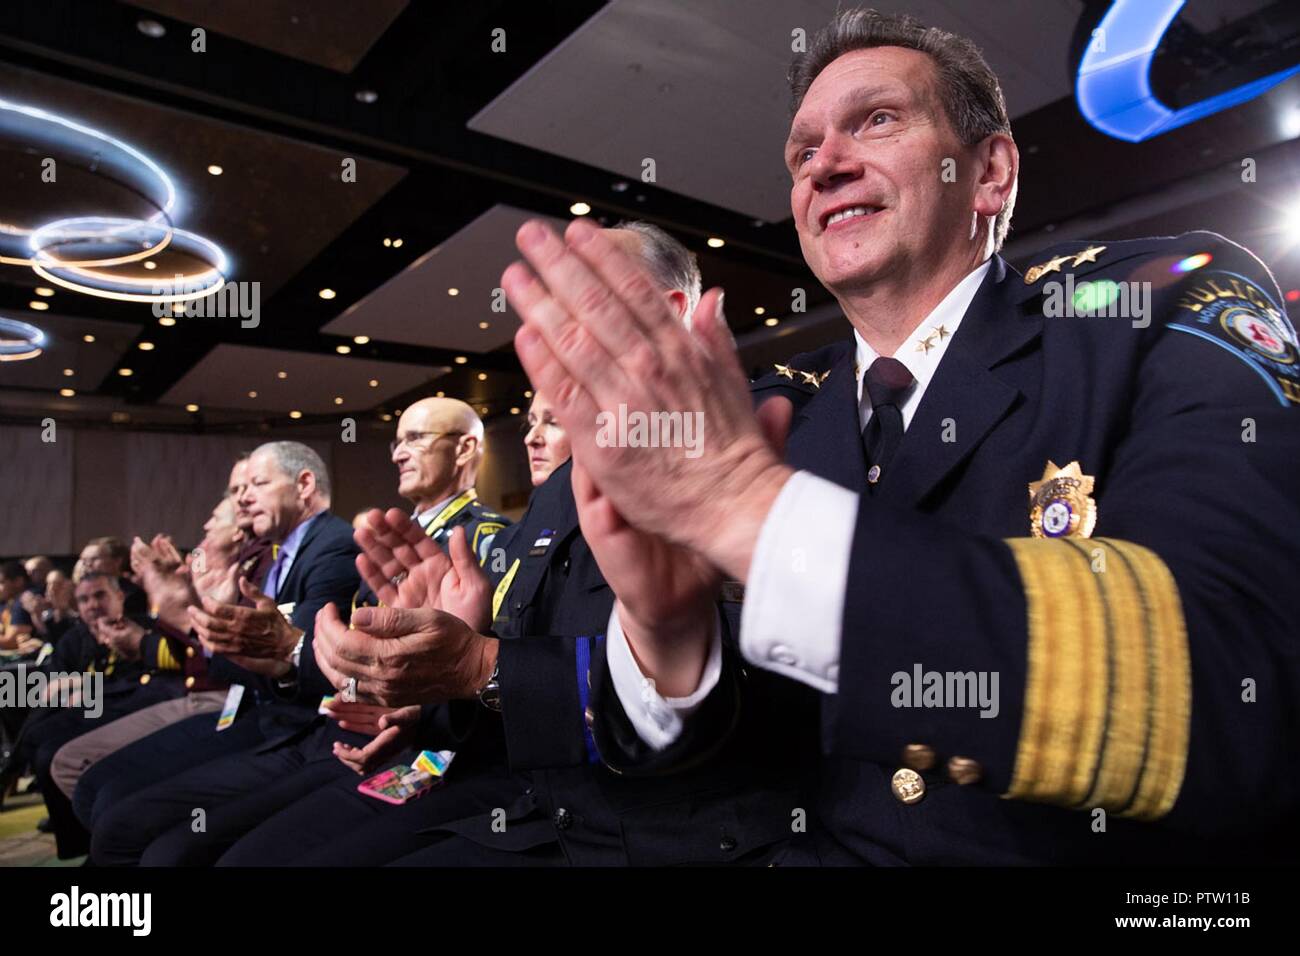 Police Chiefs applaud U.S President Donald Trump during his addresses the International Association of Chiefs of Police and Law Enforcement Convention at the Orange County Convention Center October 8, 2018 in Orlando, Florida. Stock Photo